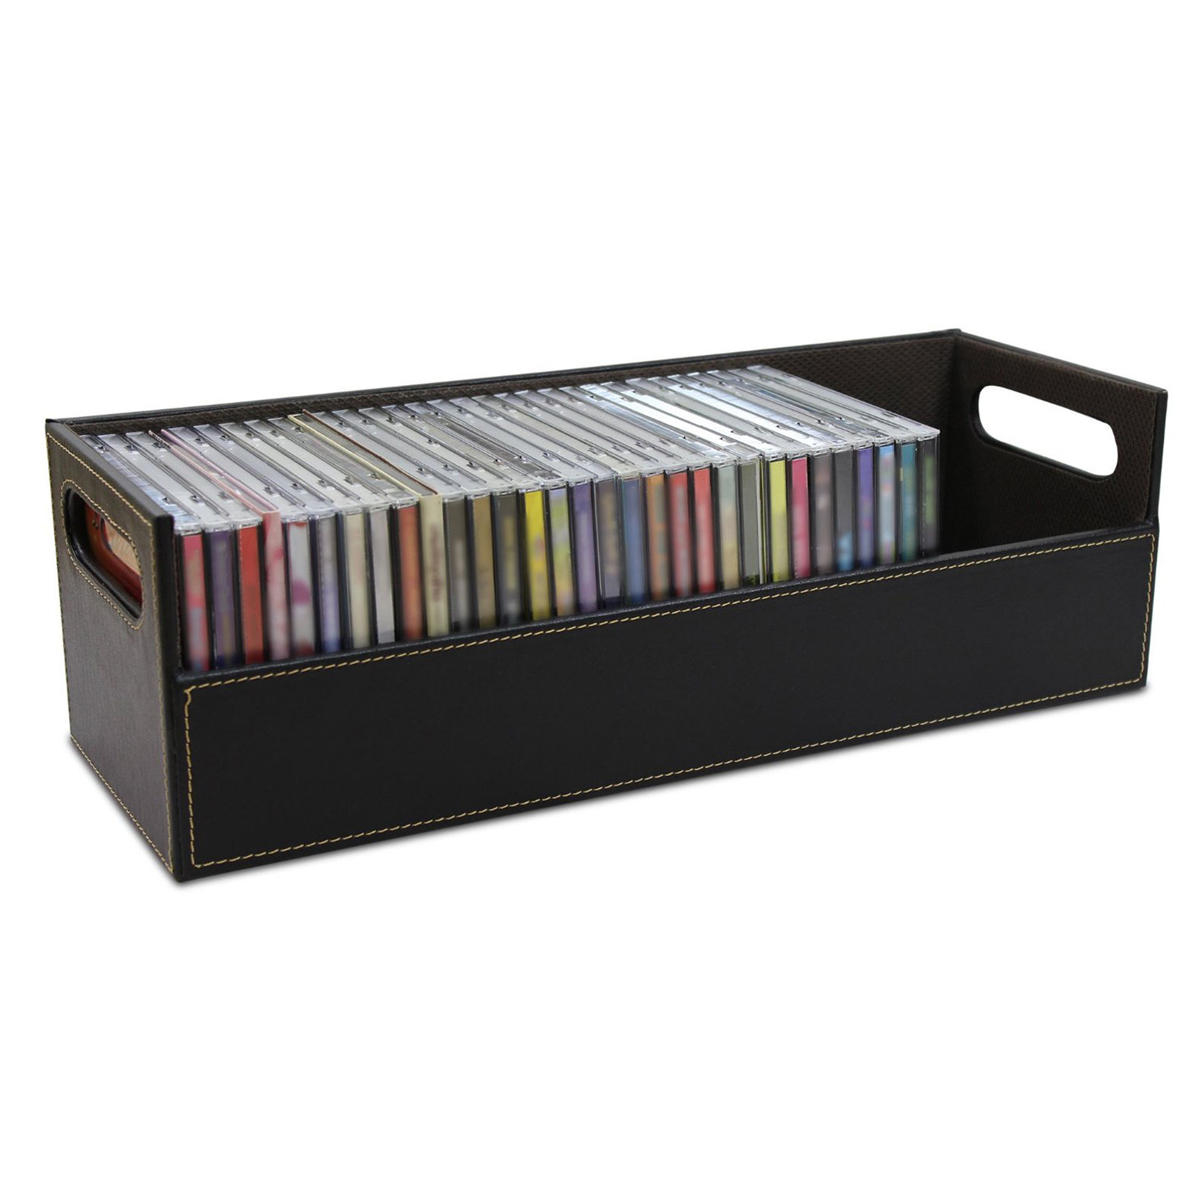 Cd Dvd Disk Storage Box Case Rack Holder Stacking Tray Shelf Space pertaining to size 1200 X 1200